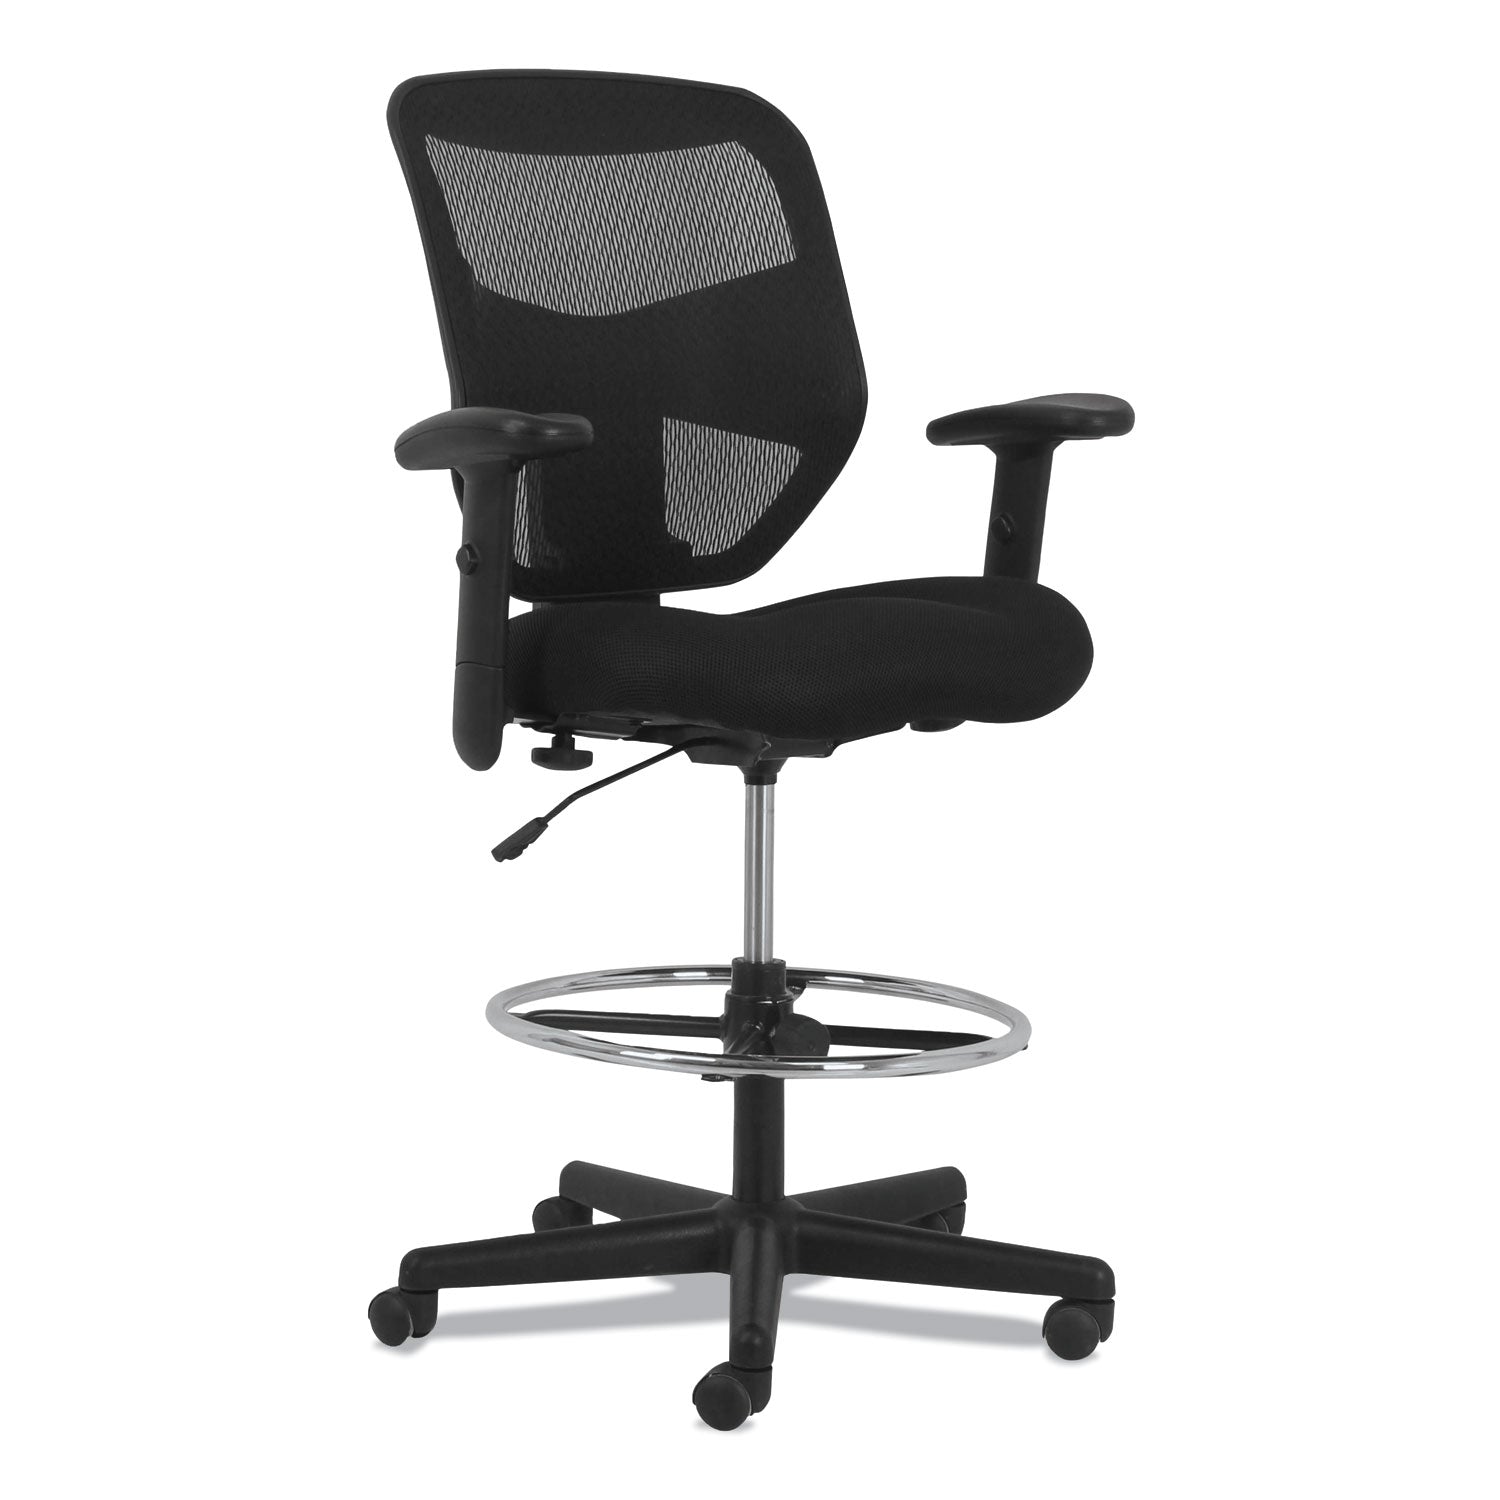 prominent-high-back-task-stool-supports-up-to-250-lb-21-to-281-seat-height-black_honvl539mm10 - 1